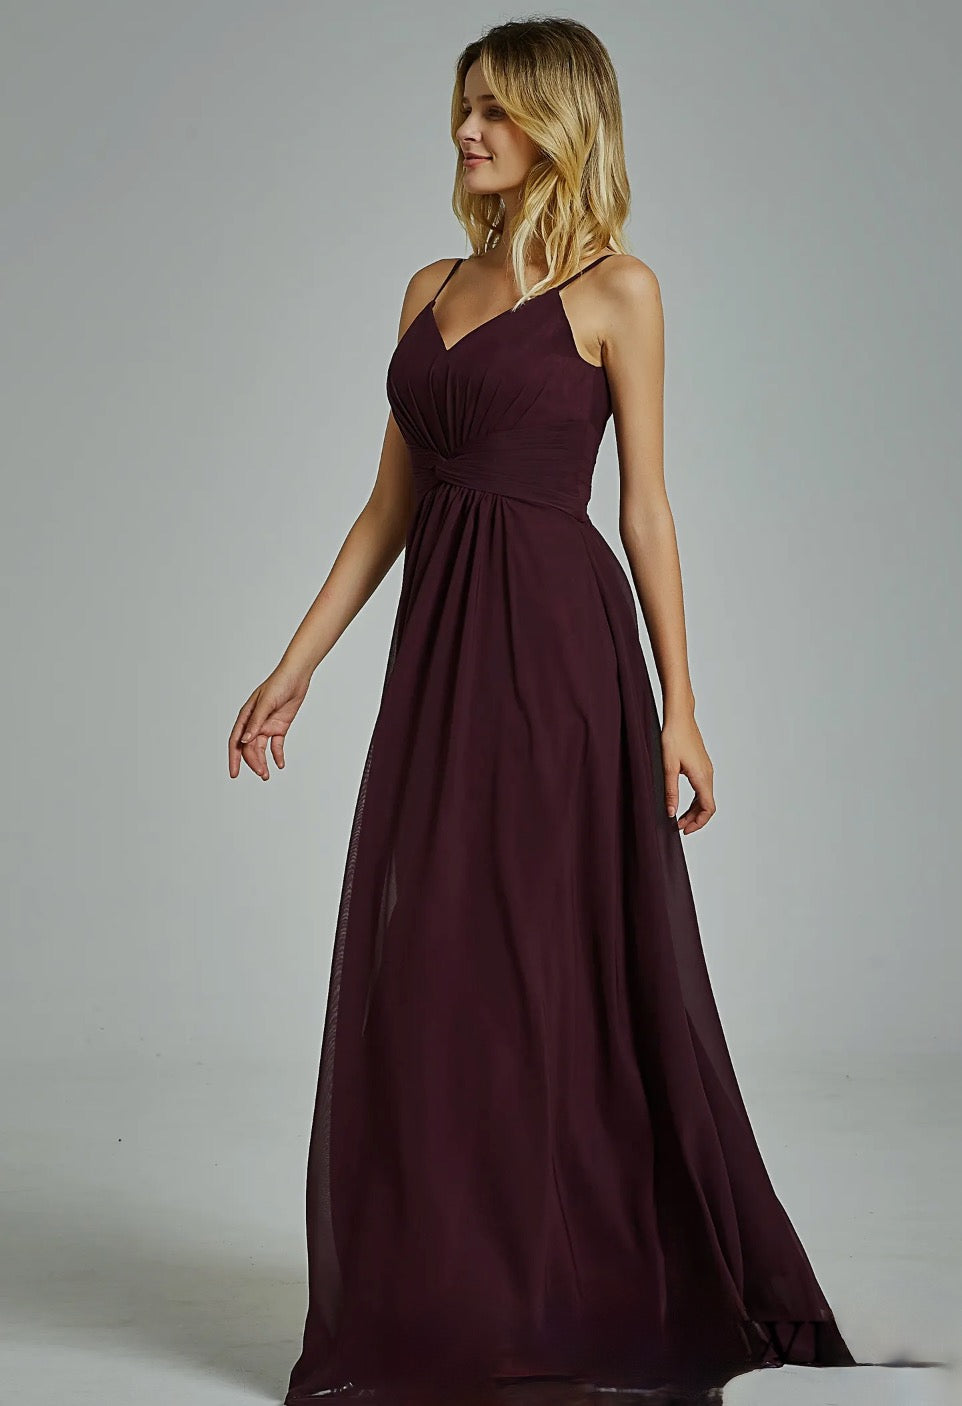 Load image into Gallery viewer, Spaghetti Straps Chiffon Bridesmaid Dress with Twist Front Bodice
